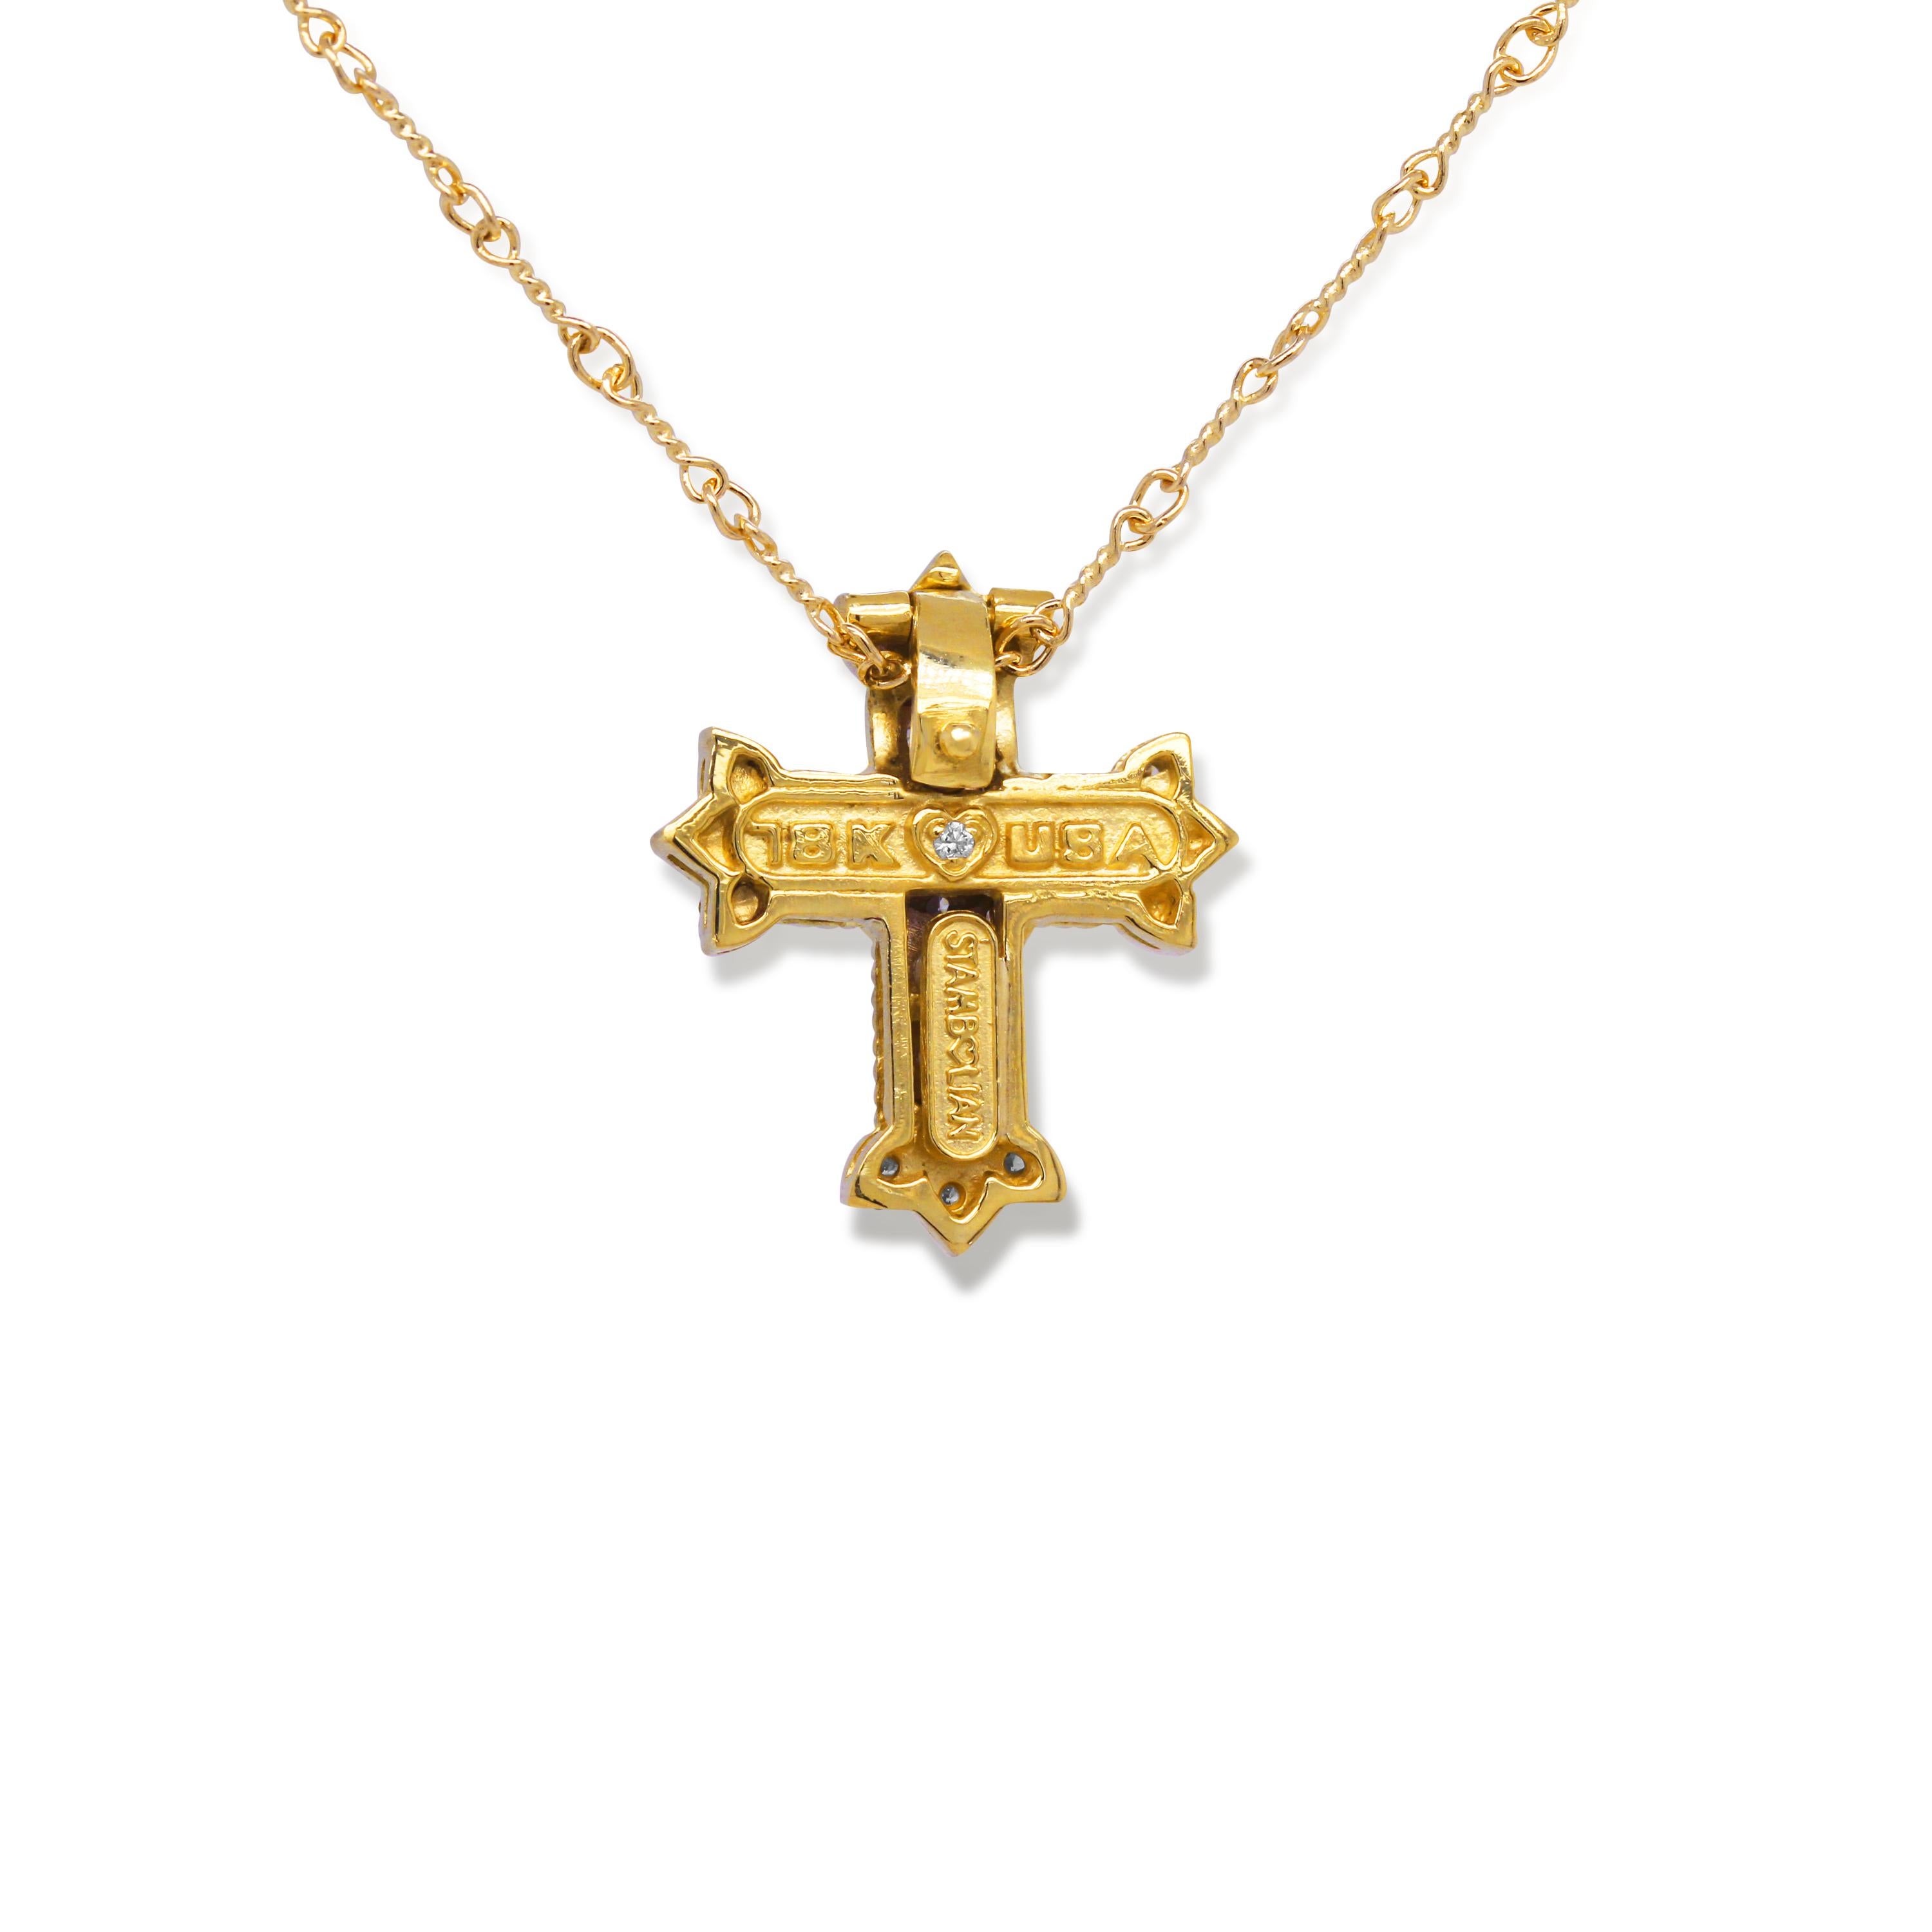 Stambolian 18K Yellow White Two Tone Gold Diamond Small Cross Pendant Chain Necklace

0.67 carat G color, VS clarity diamonds total weight.  

Cross is 0.80 inch in length from top to bottom. Bail is hidden on the opposite side and locks and